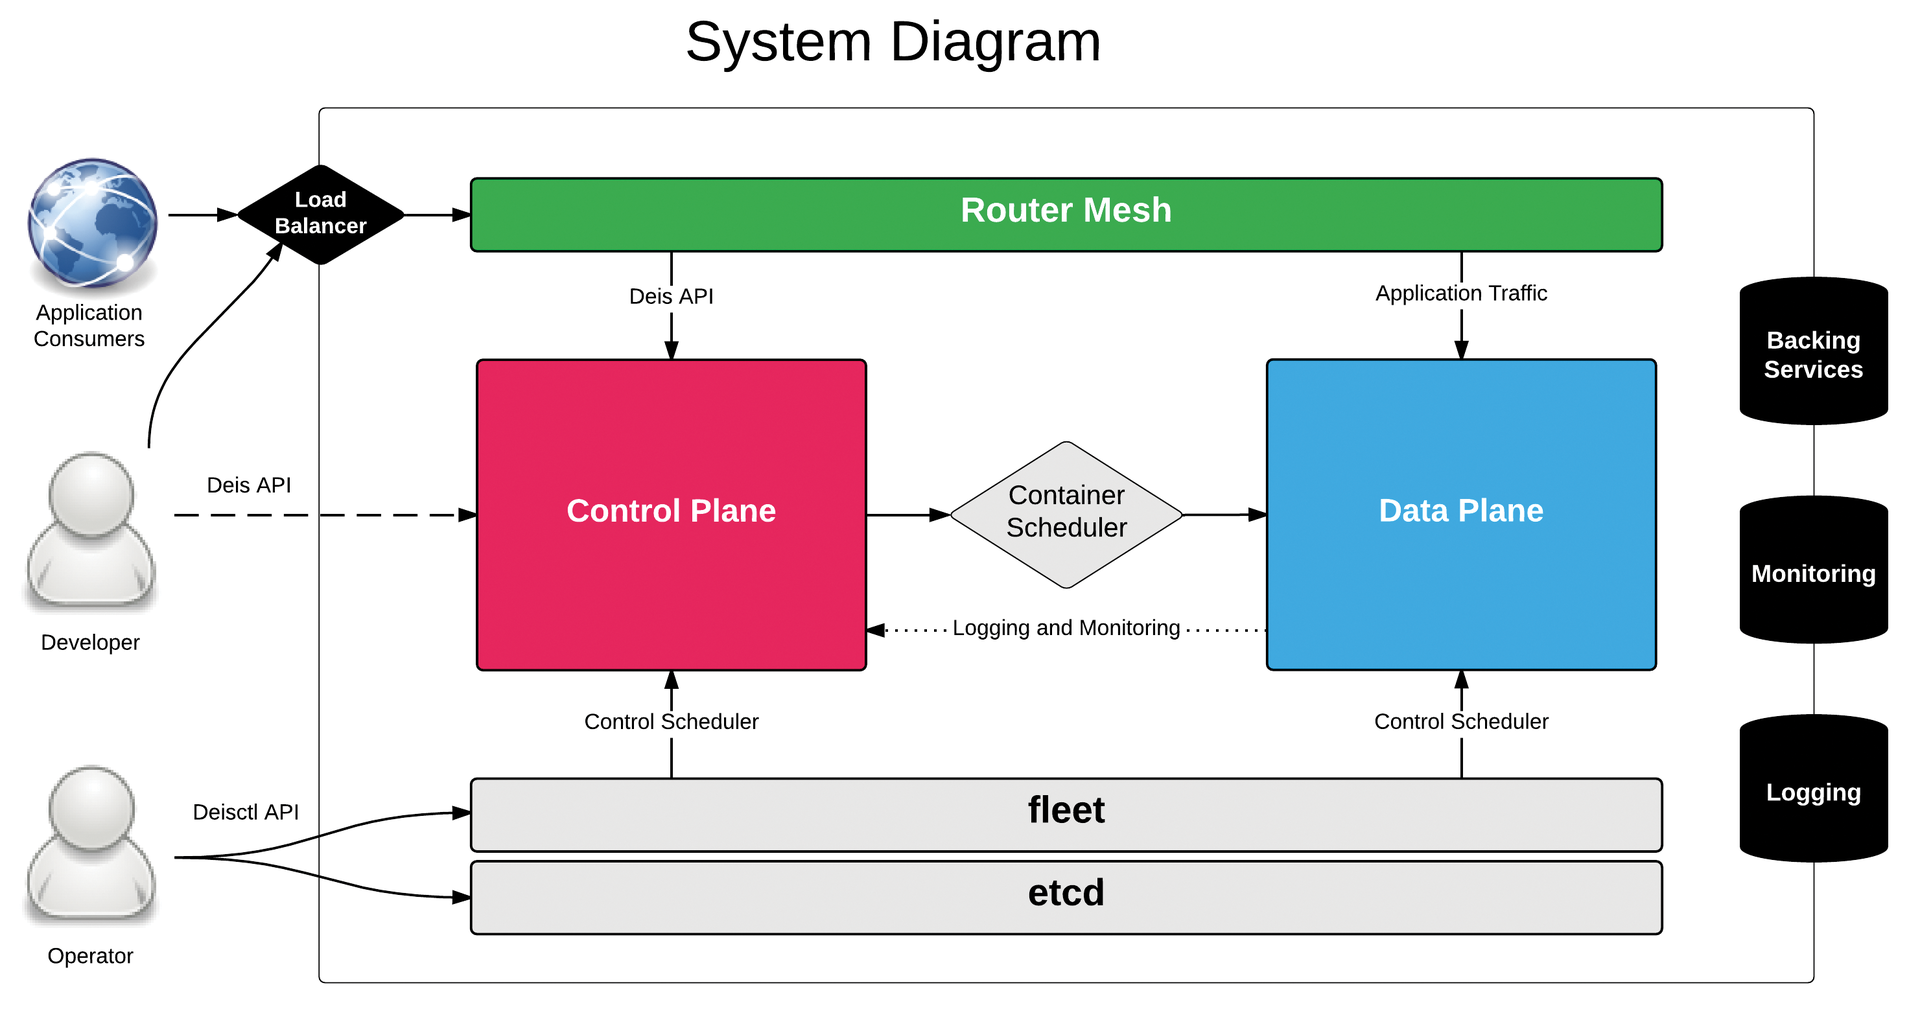 The basic Deis components are control and data planes. The routers, which also work as a mesh network, are particularly important. The black squares are the attached resources. (Image from: http://docs.deis.io) 